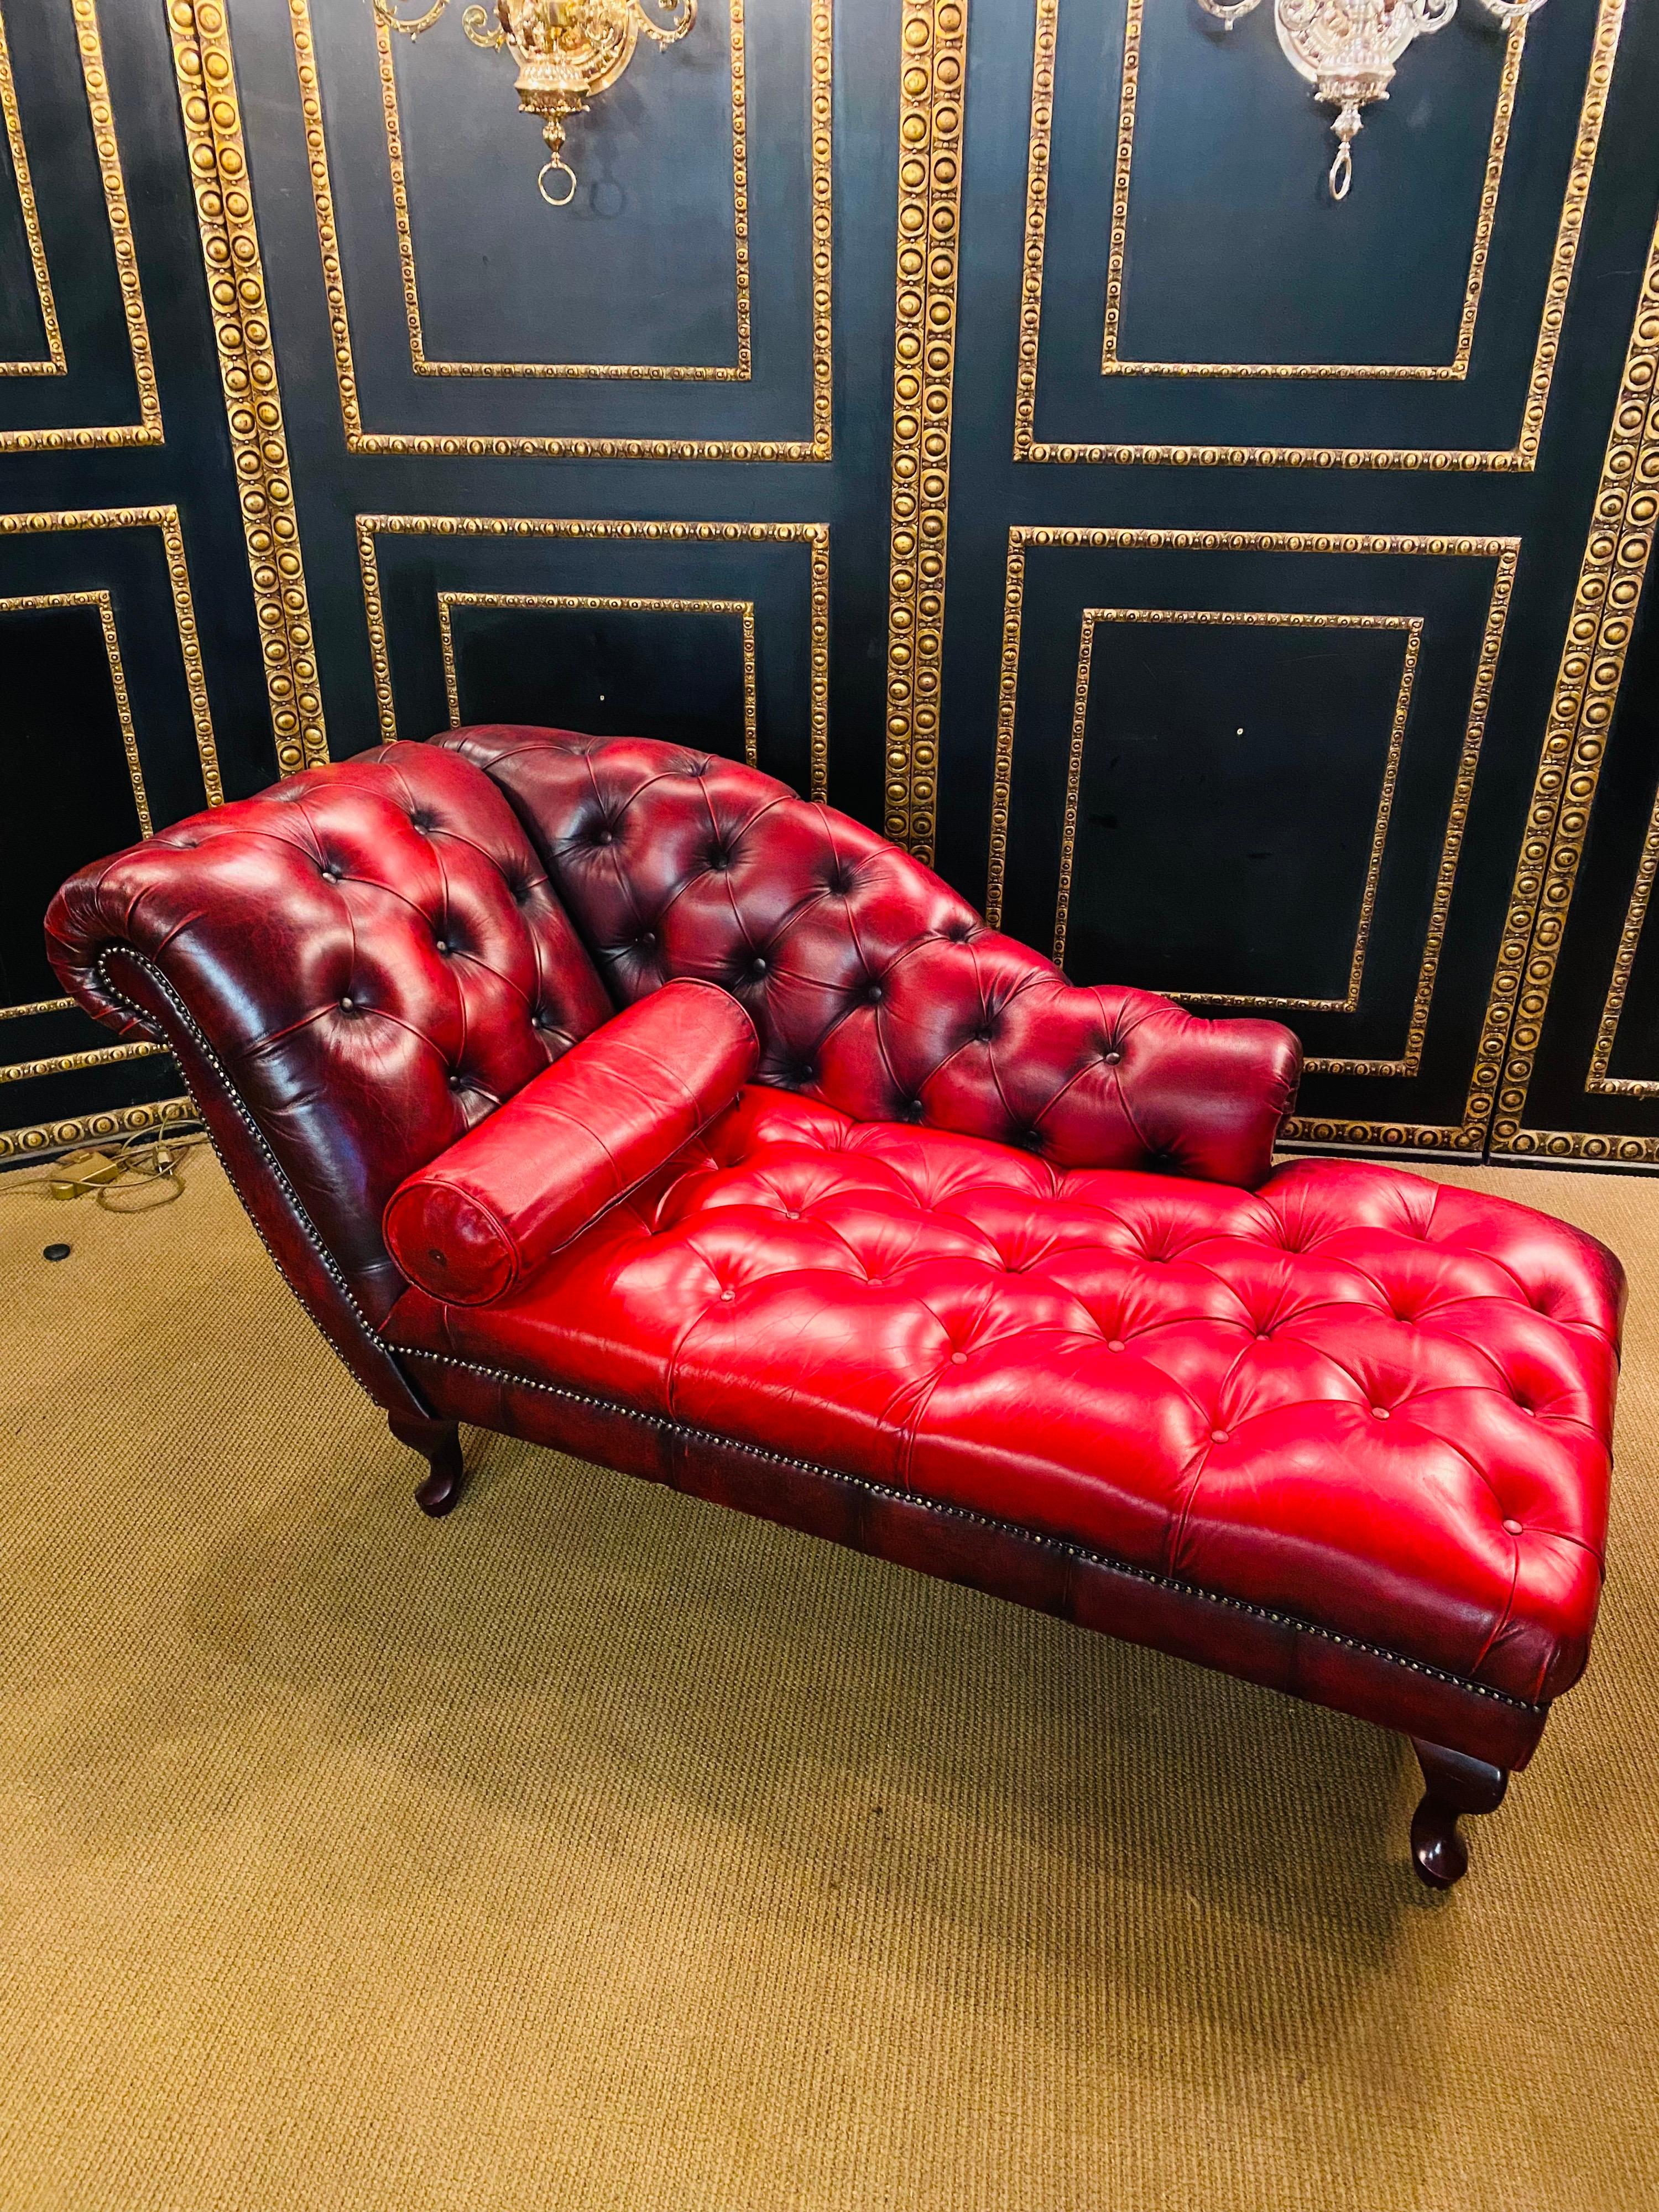 Lovely original vintage Chesterfield Red Leather Chaise Lounge Daybed Sofa For Sale 12